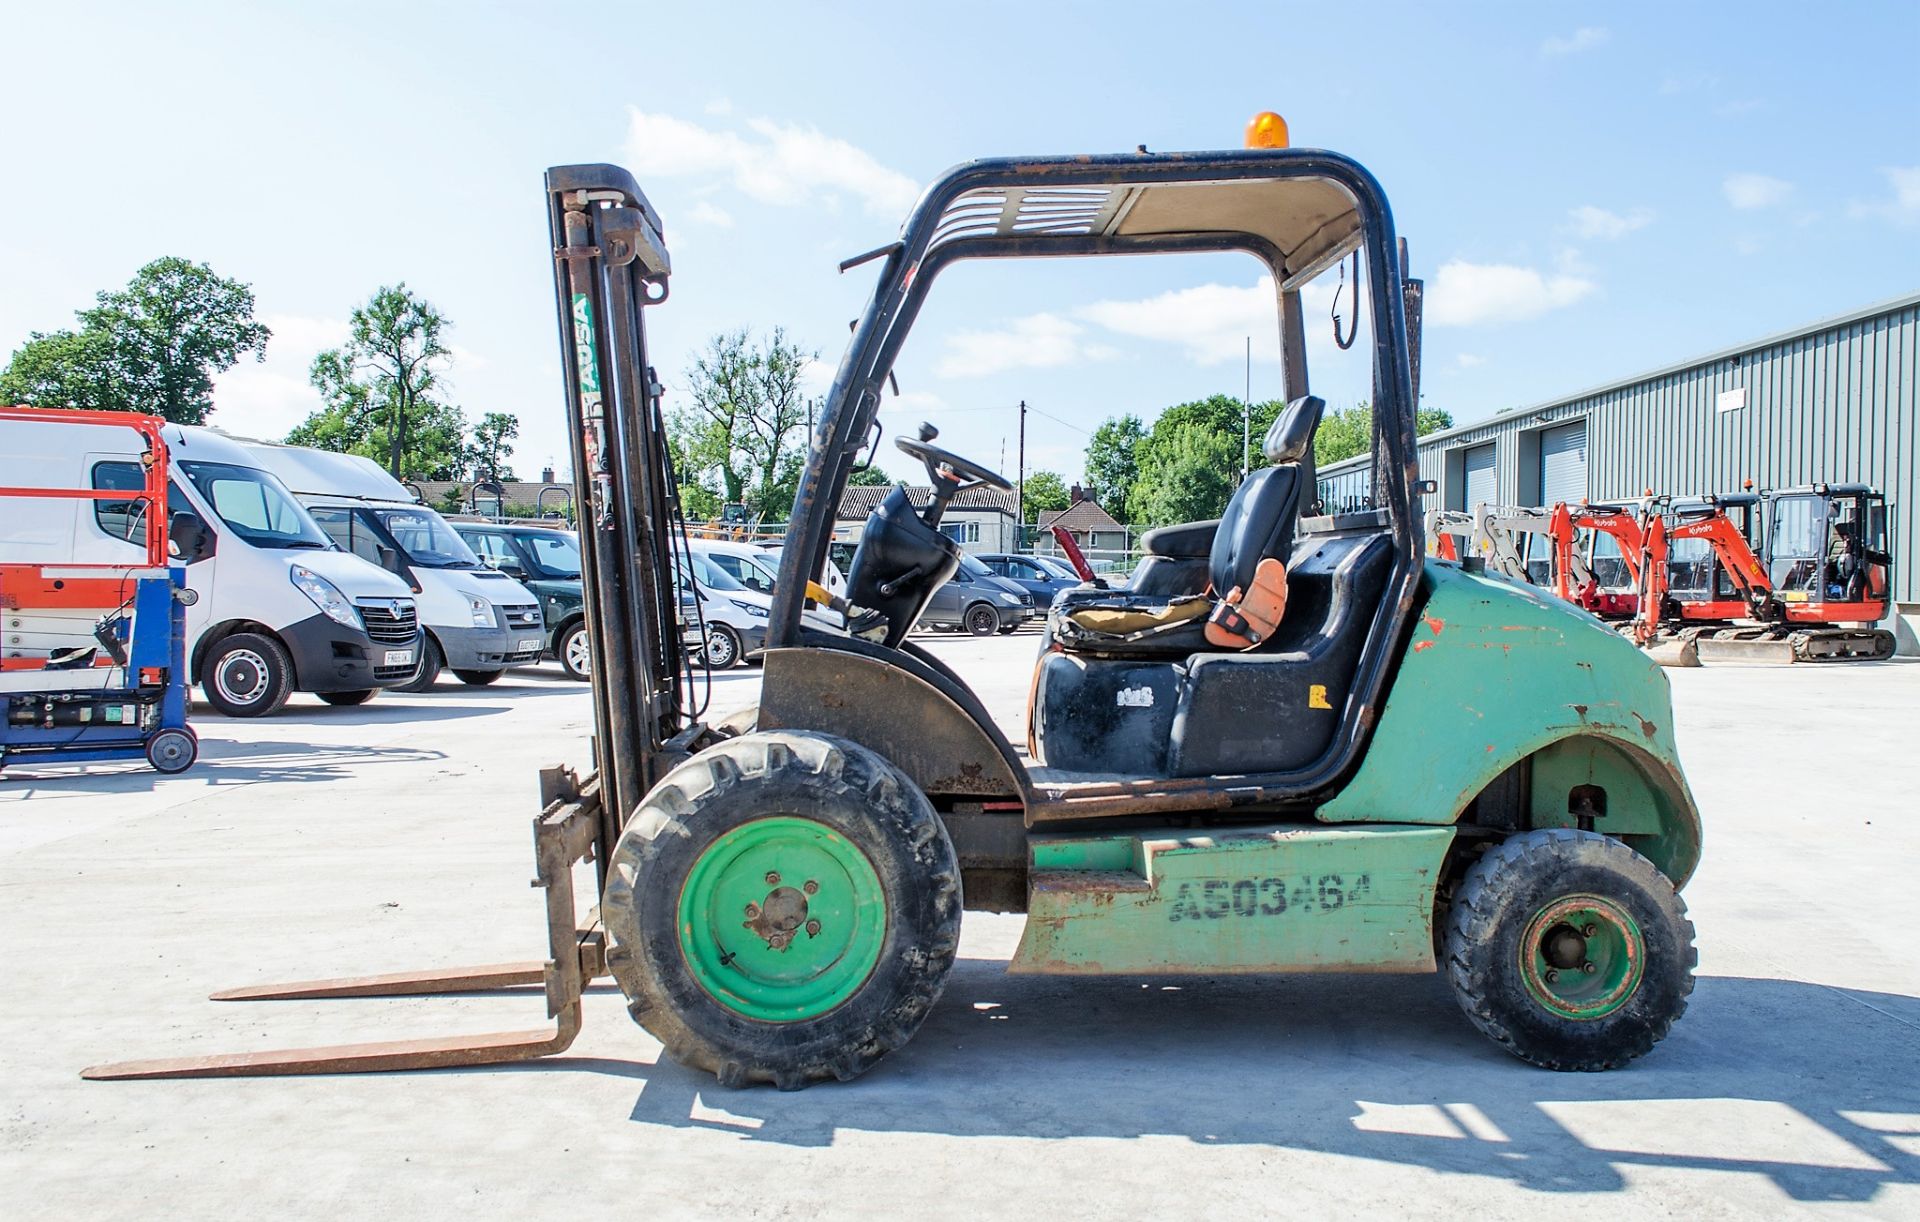 Ausa C150H 1.5 tonne diesel driven fork lift truck Year: 2008 S/N: 12059813 Recorded Hours: 2329 - Image 8 of 16